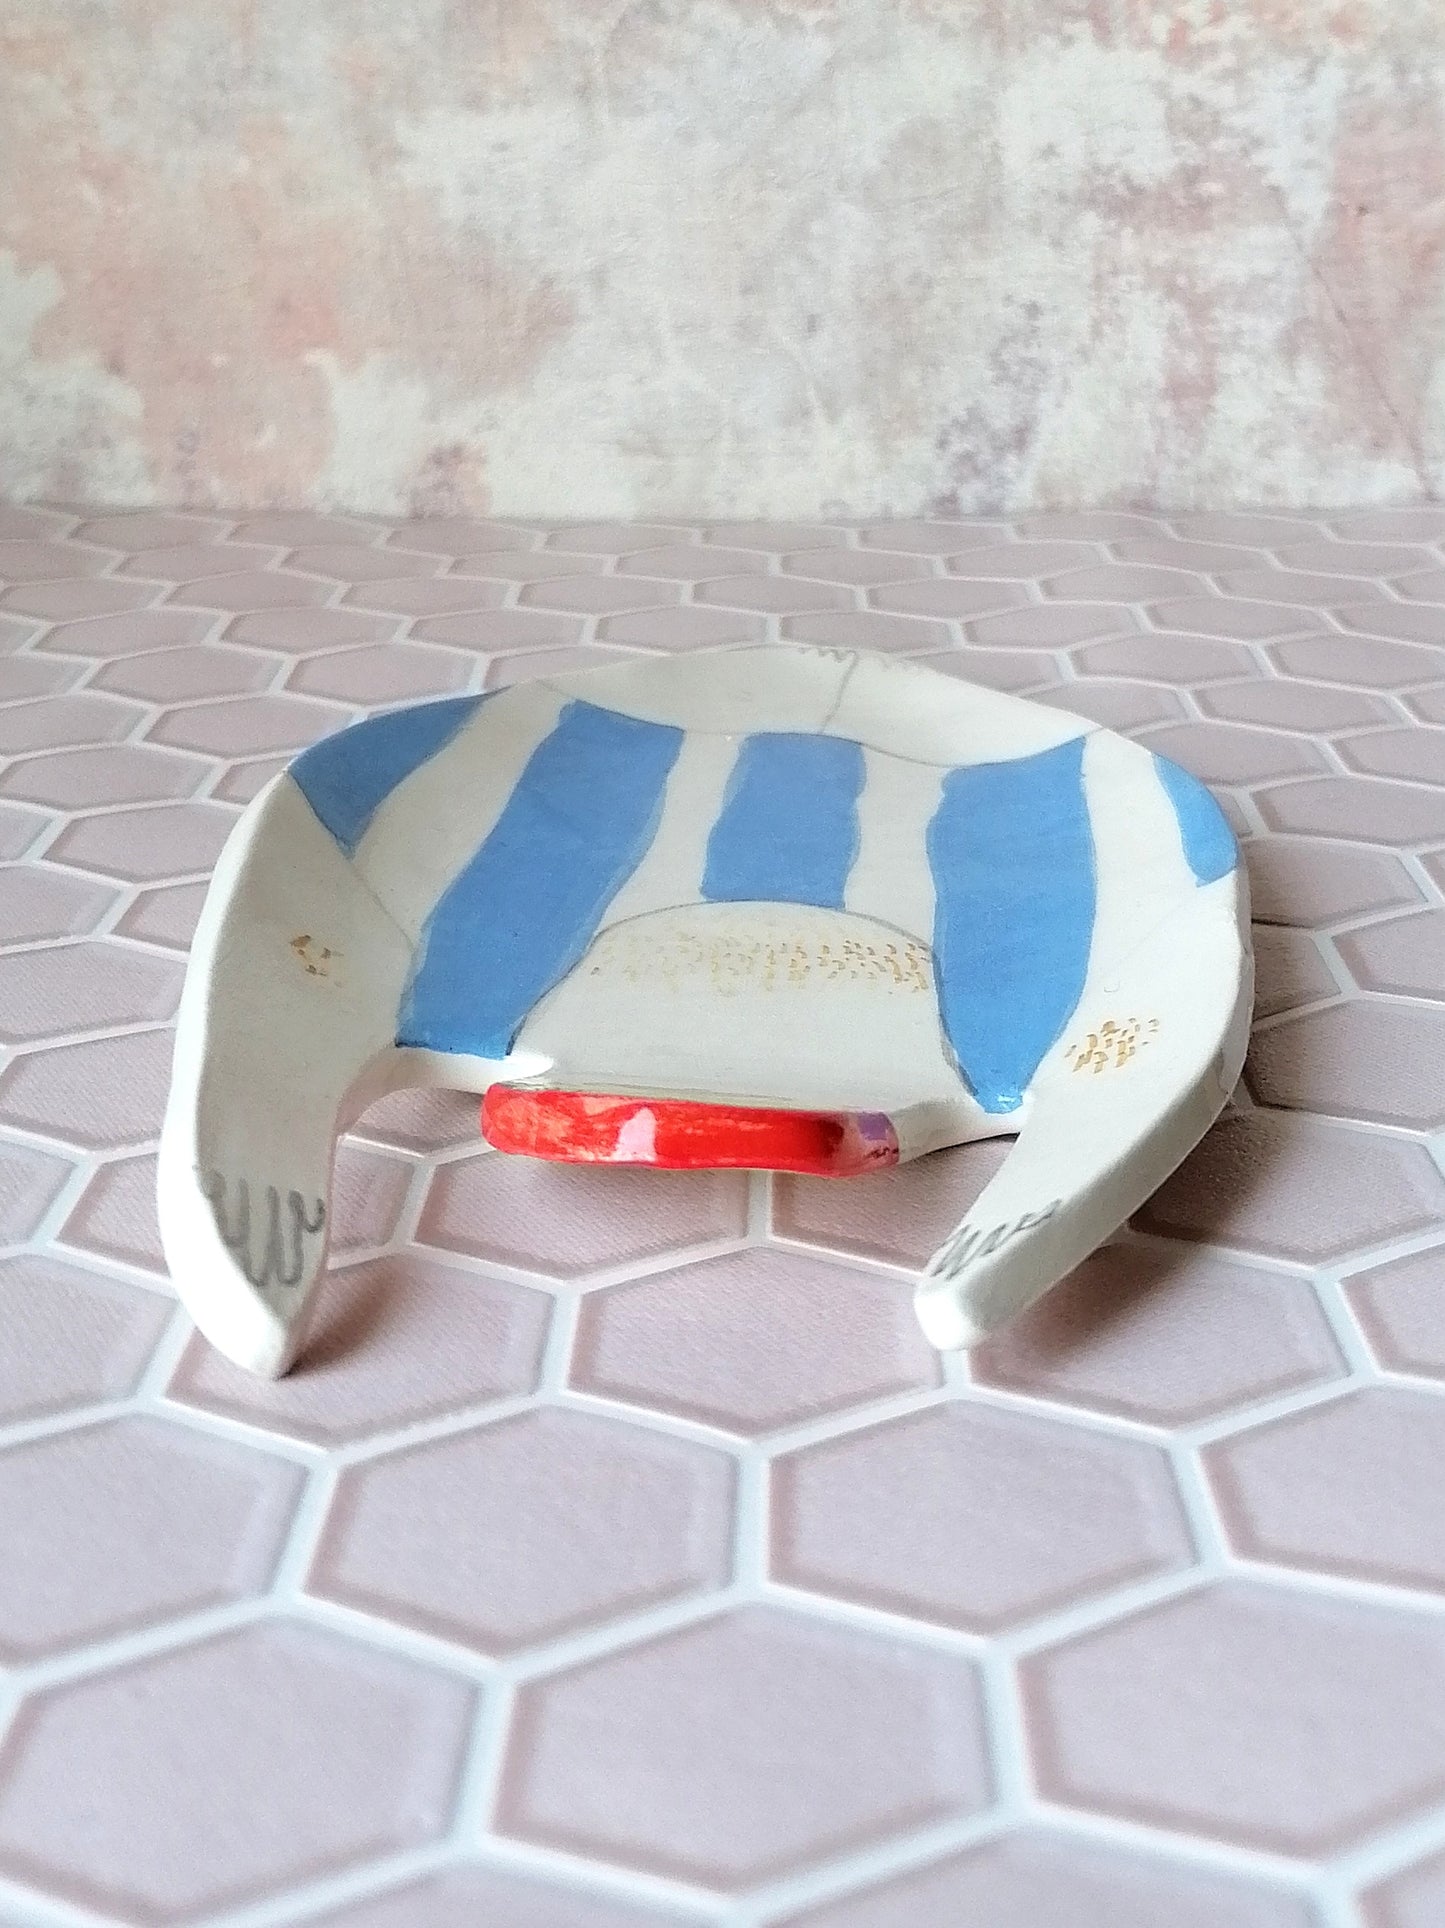 Made to order: Sid the swimmer handmade ceramic dish